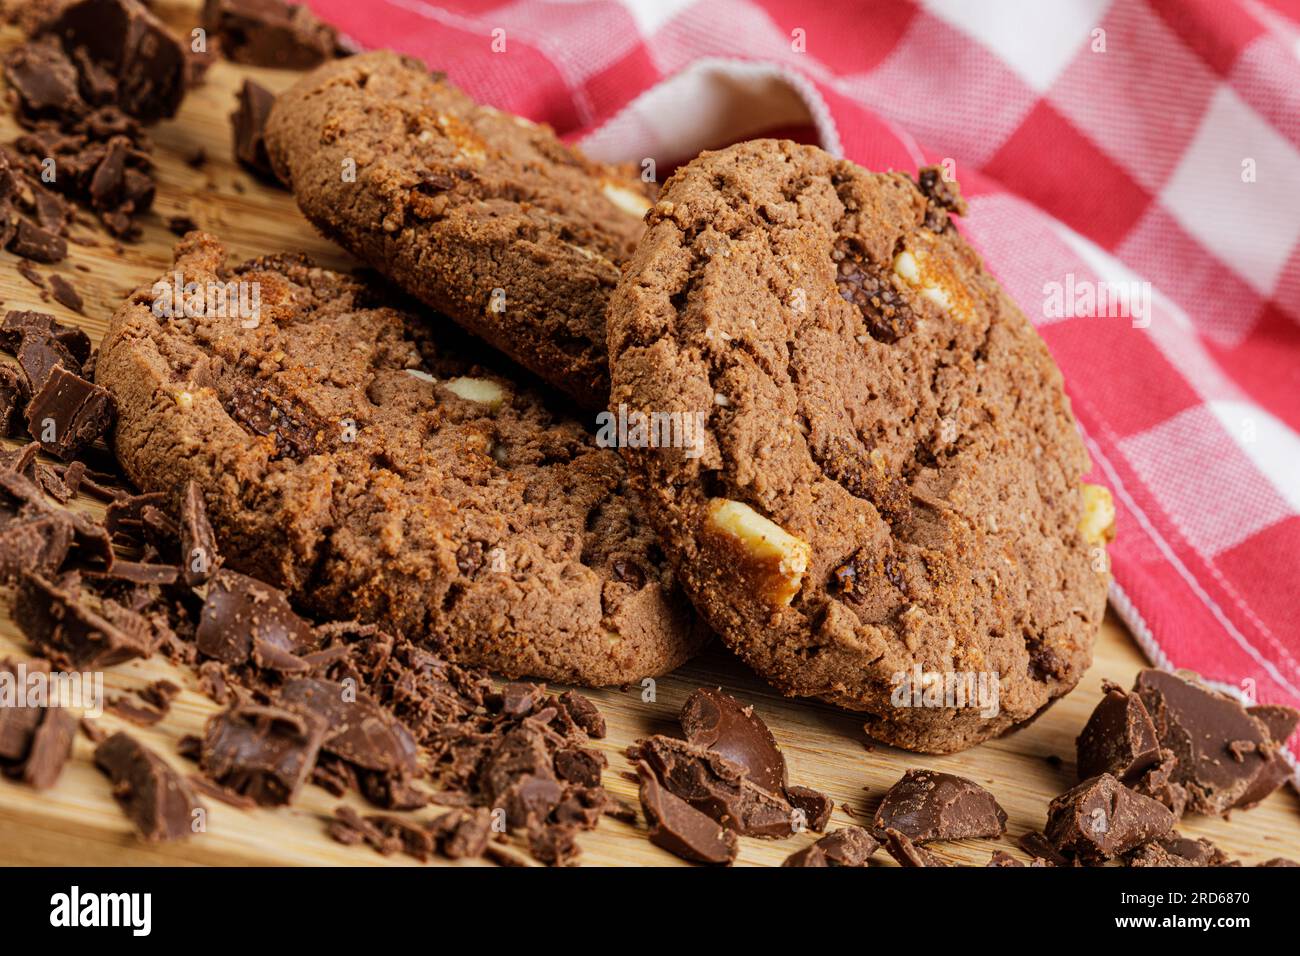 Close up of delicious tempting Chocolate Chip Cookies on a wooden background with copy space Stock Photo